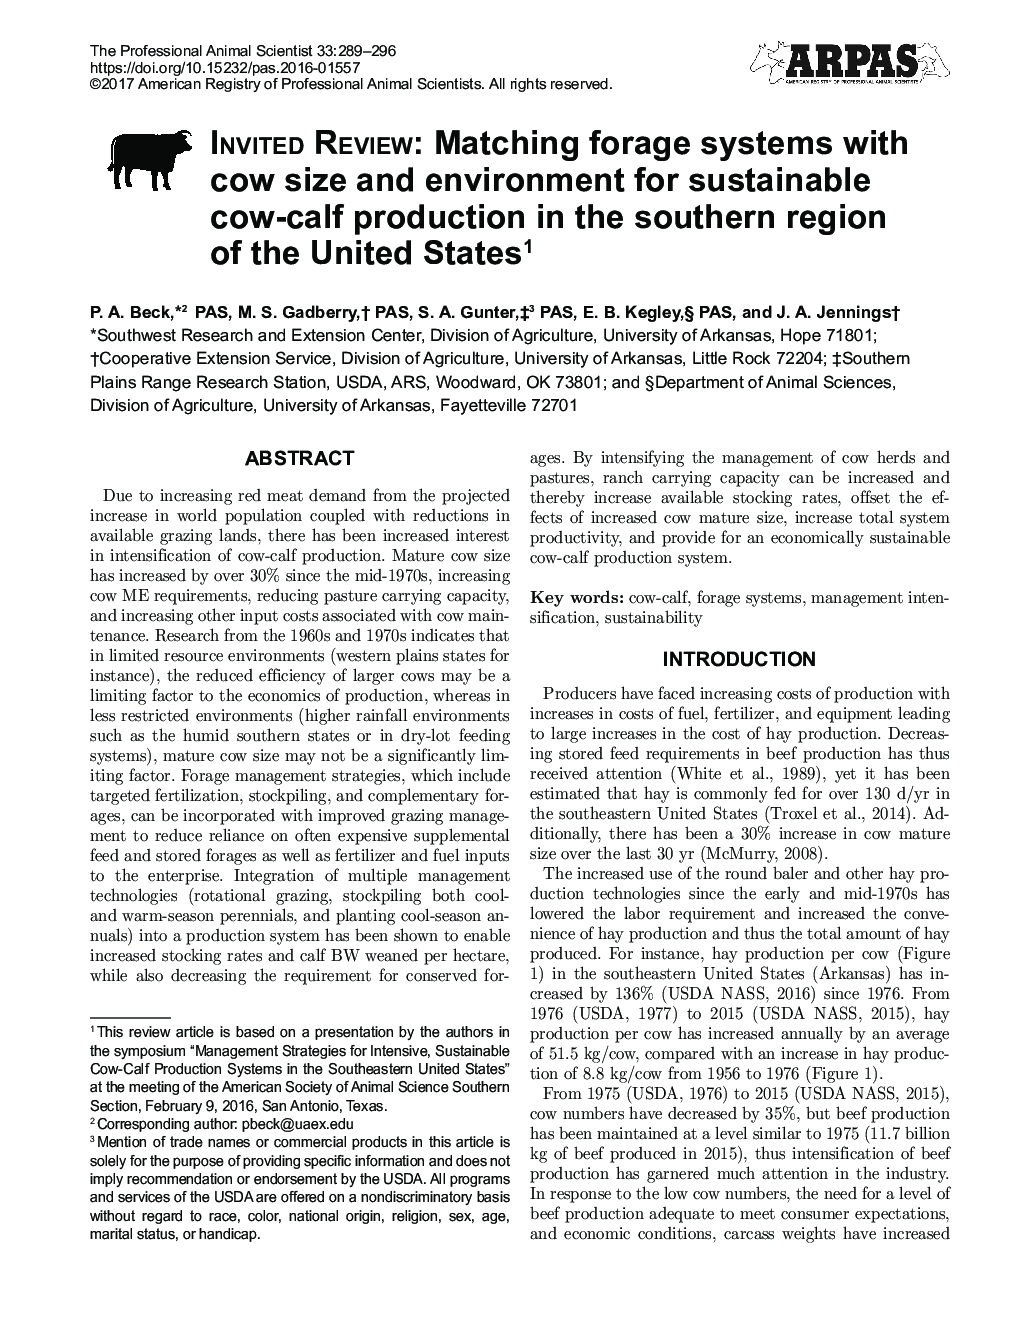 Invited Review: Matching forage systems with cow size and environment for sustainable cow-calf production in the southern region of the United States1